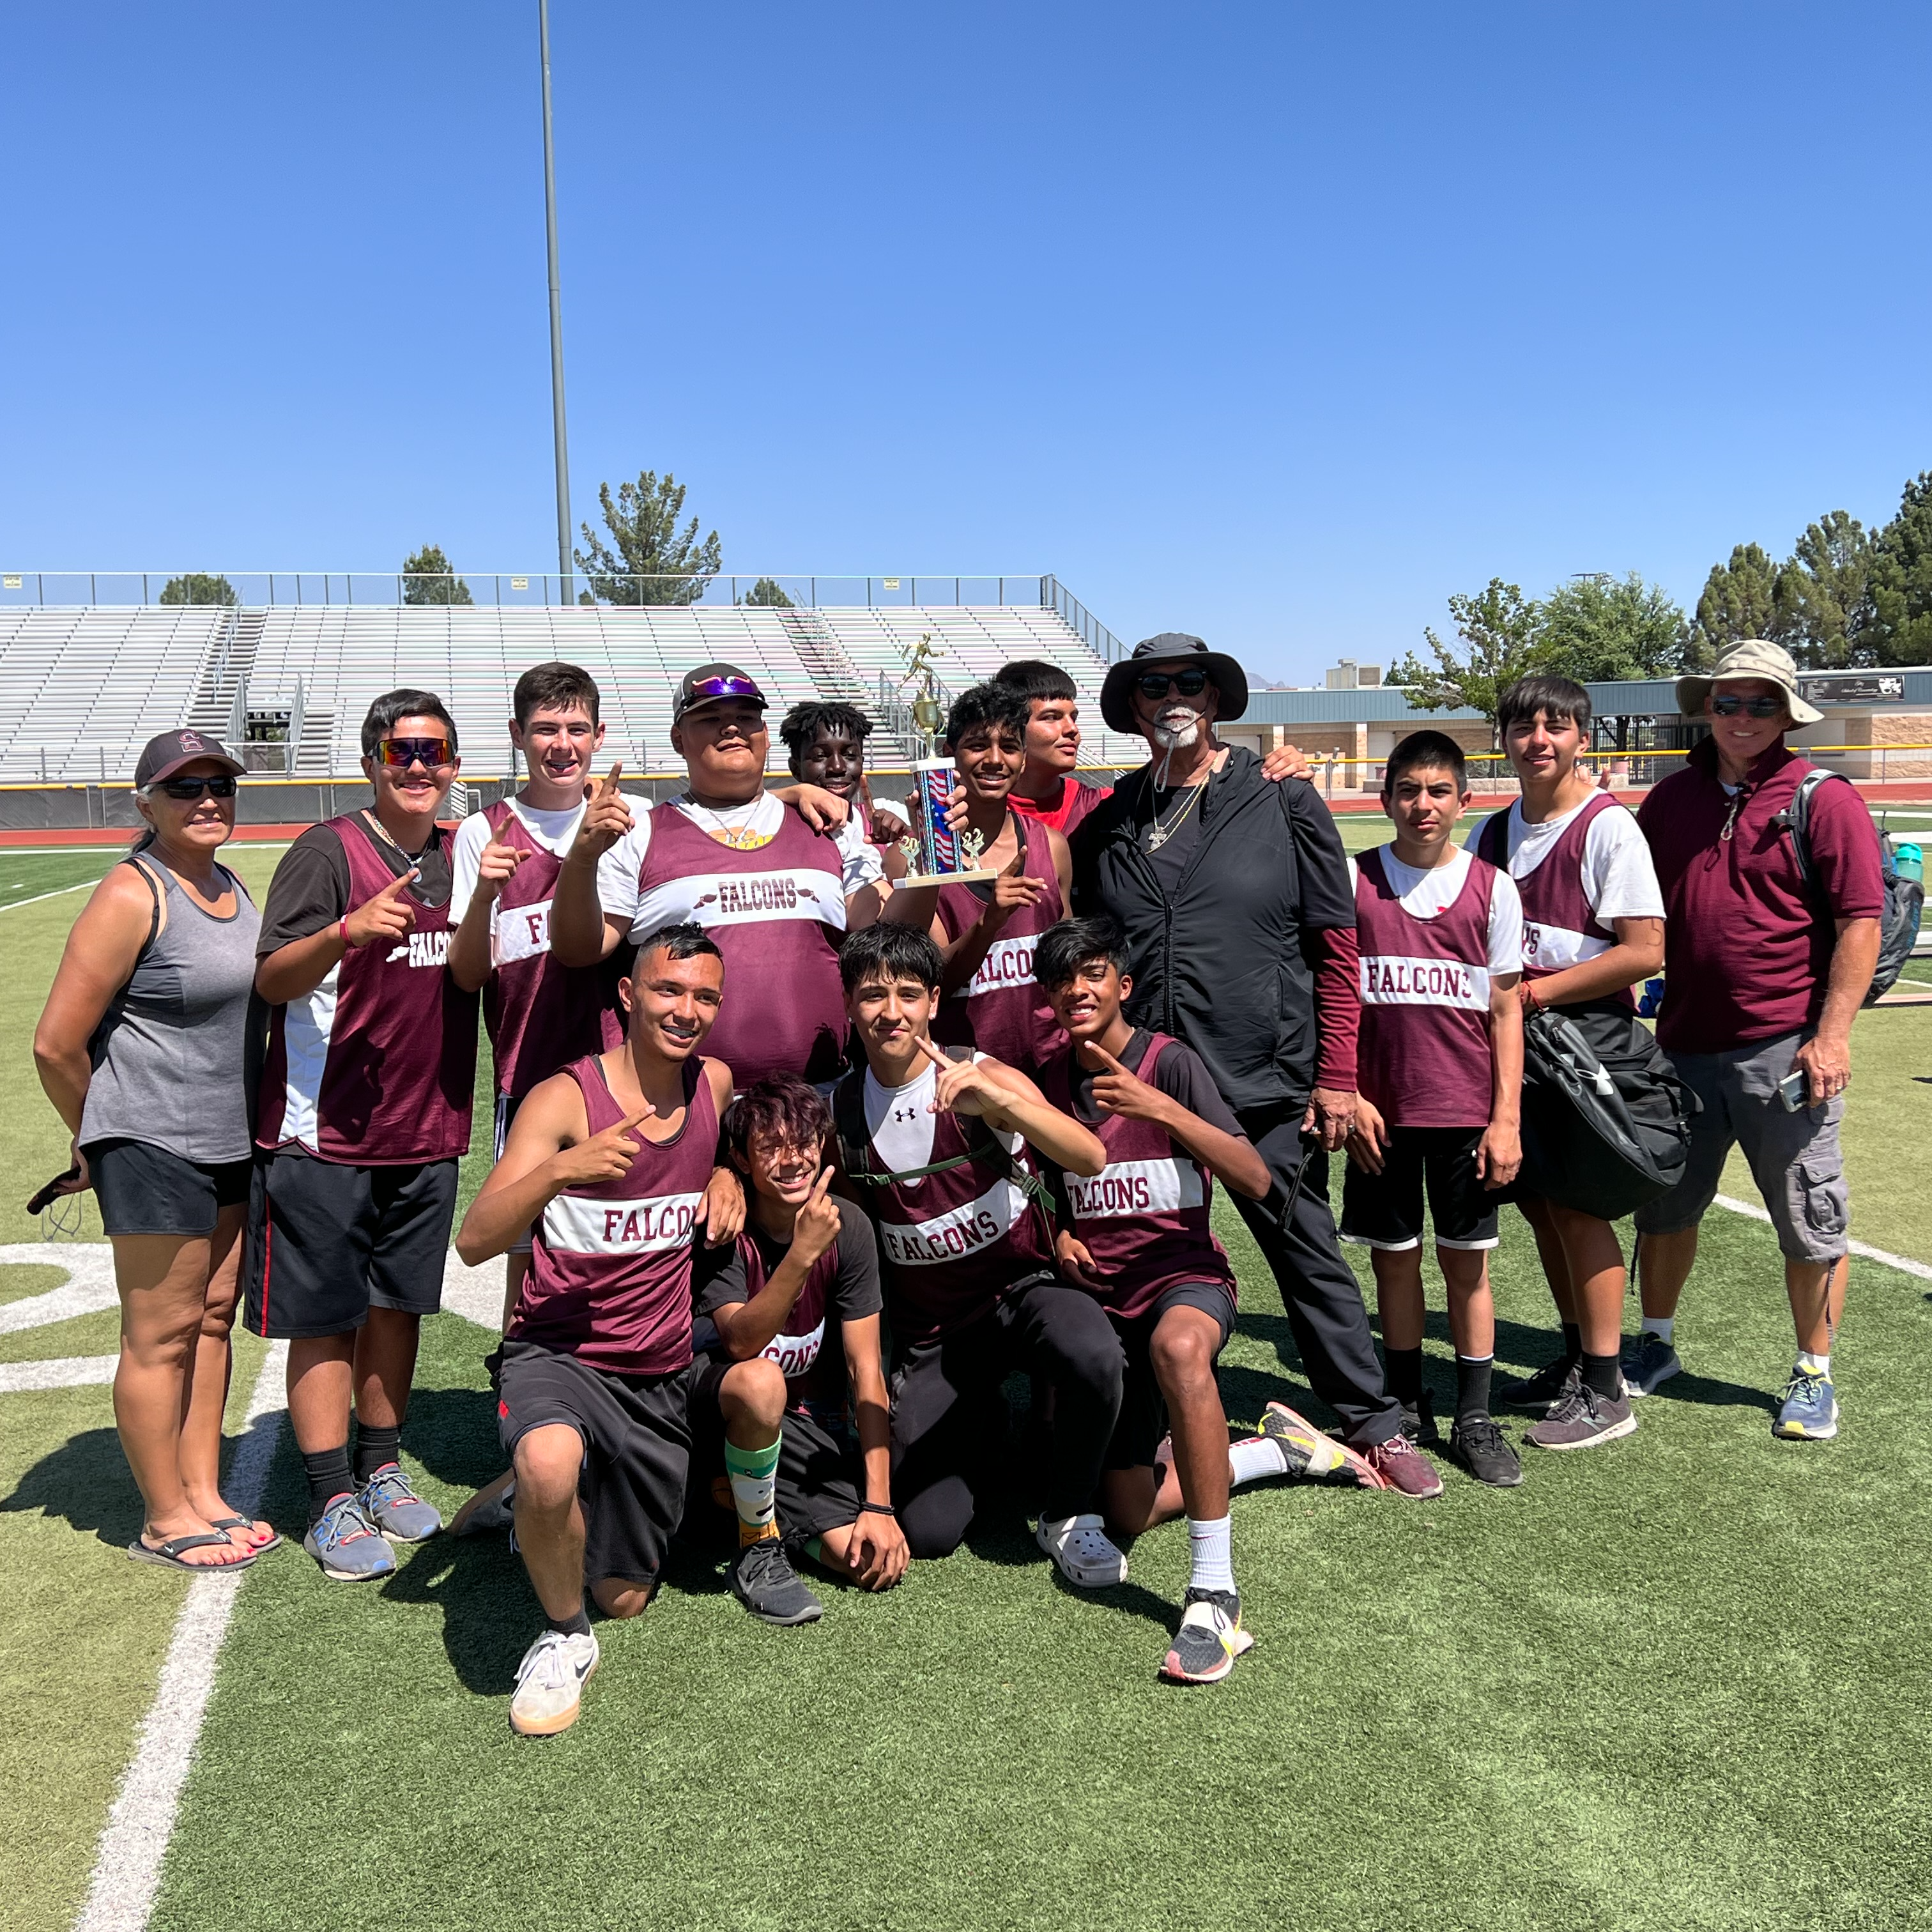 Congratulations to the 2022 Boys’ District Champions for Track and Field, the Sierra Middle School Falcons!